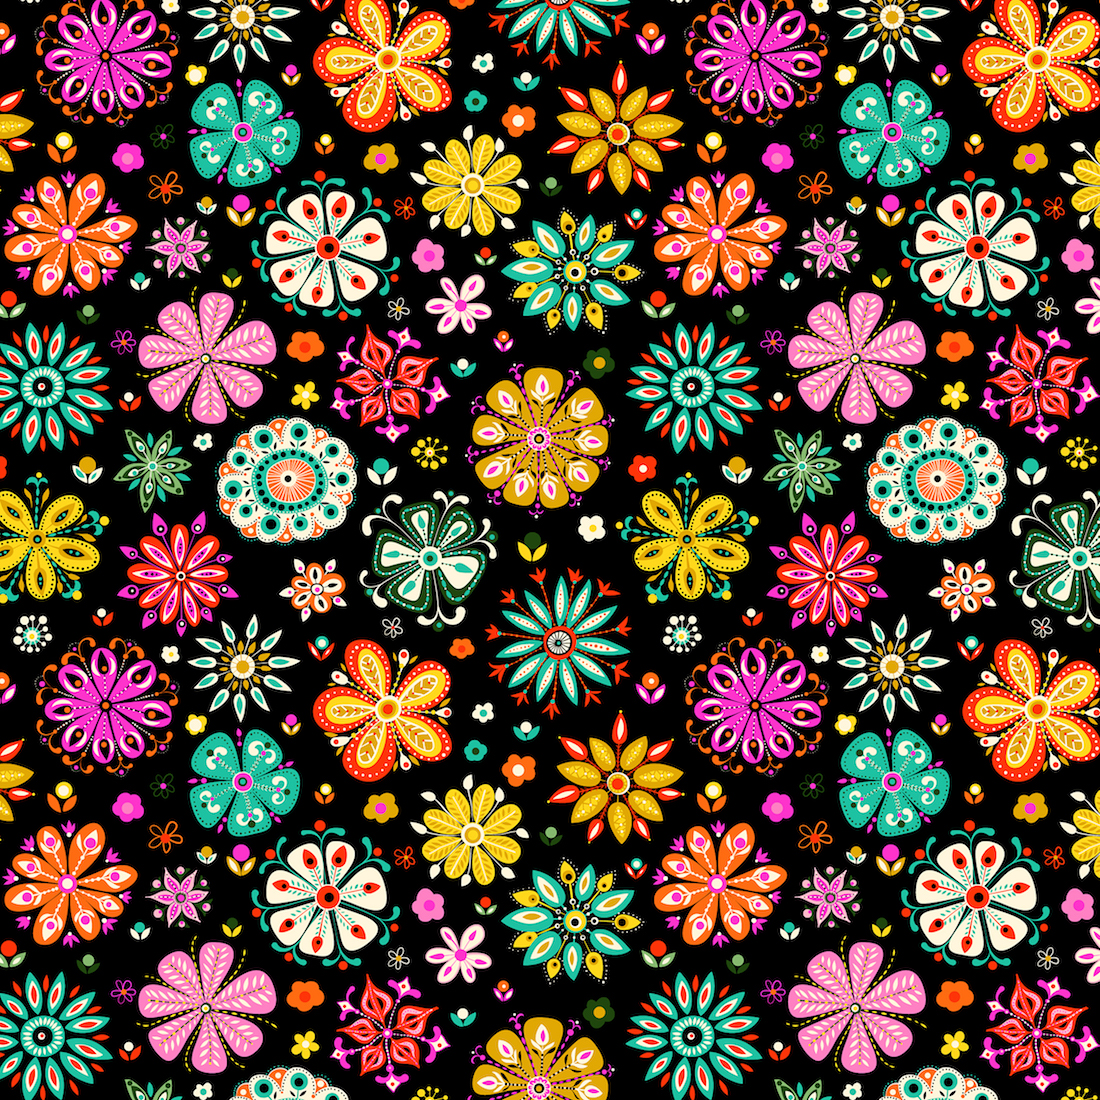 Stationery and art supplies inspired illustrations for pattern design